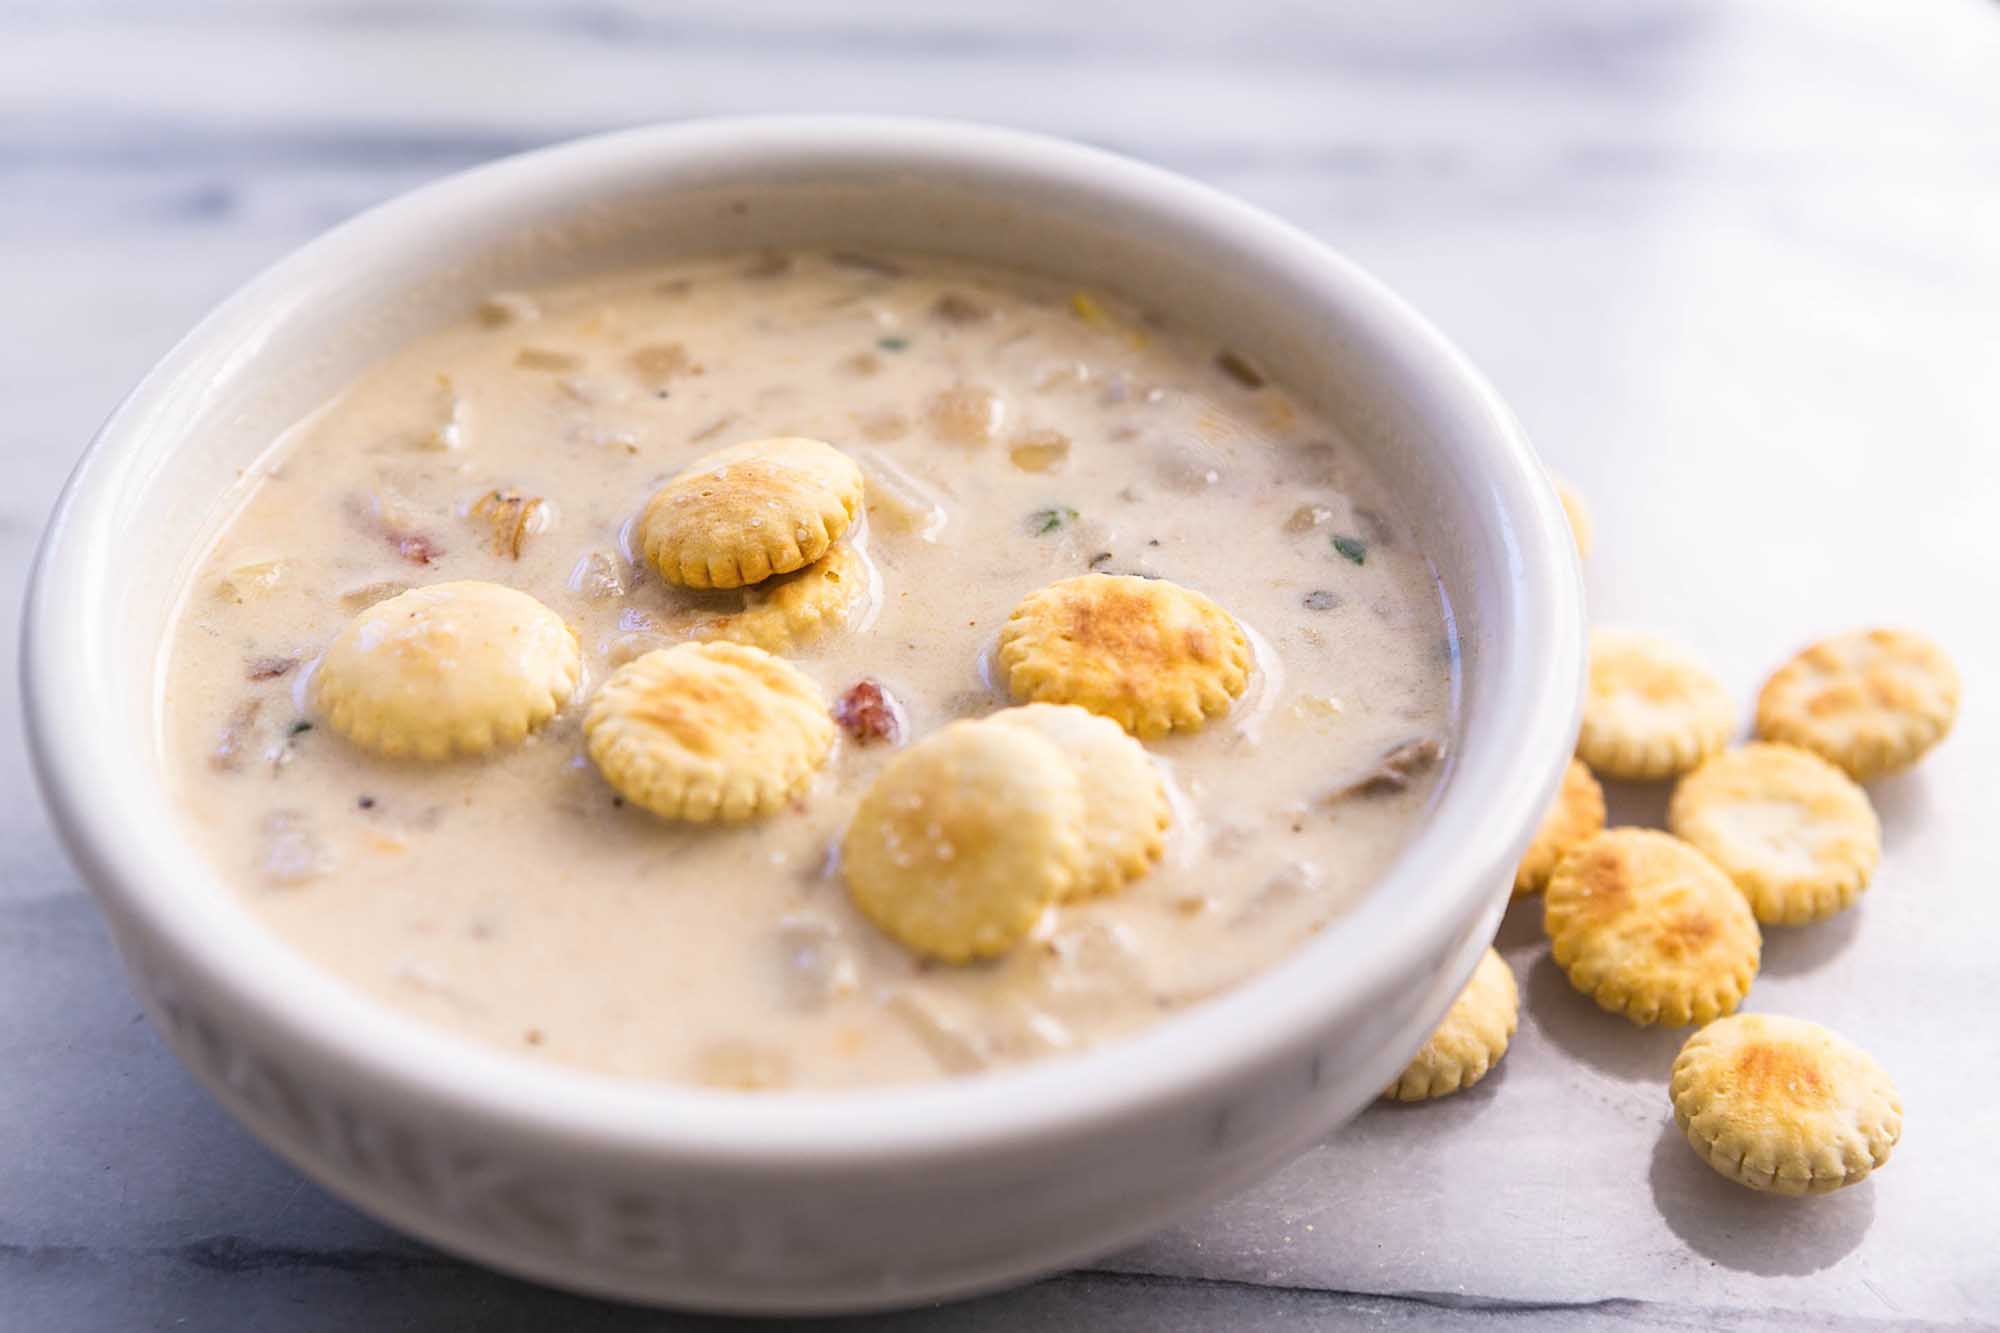 Bowl of New England Clam Chowder with Corn and Oyster Crackers